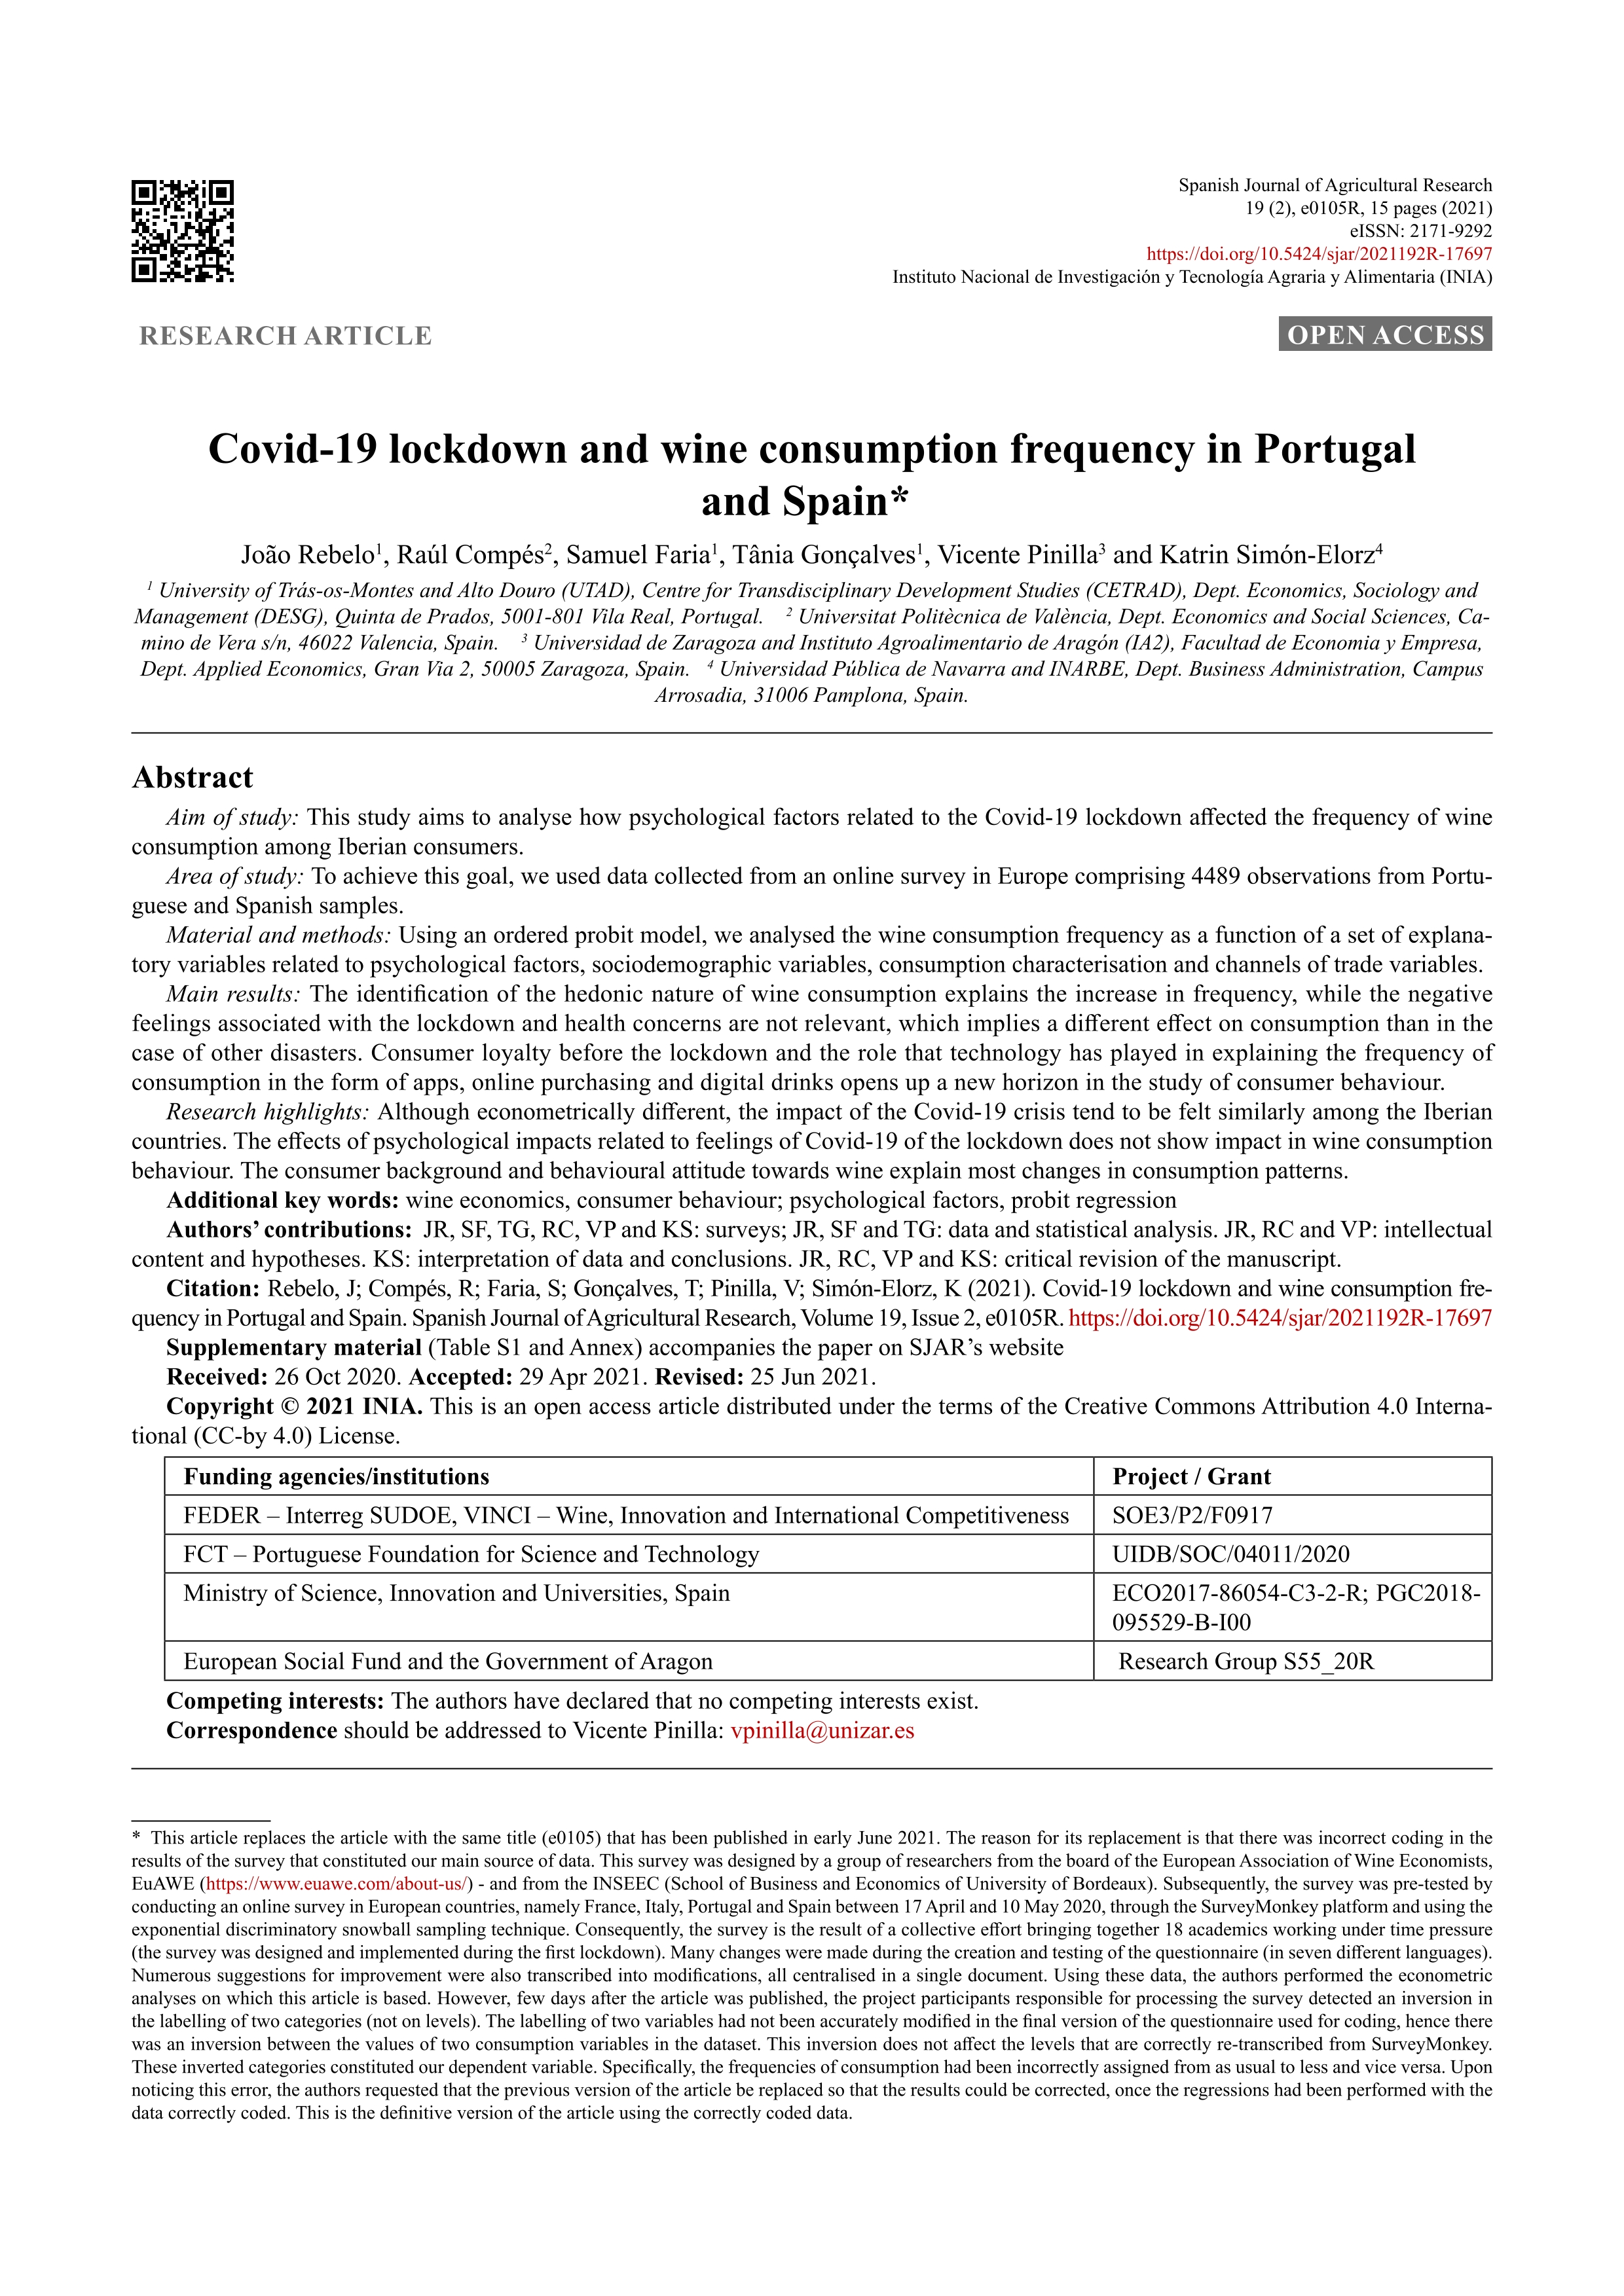 Covid-19 lockdown and wine consumption frequency in Portugal and Spain